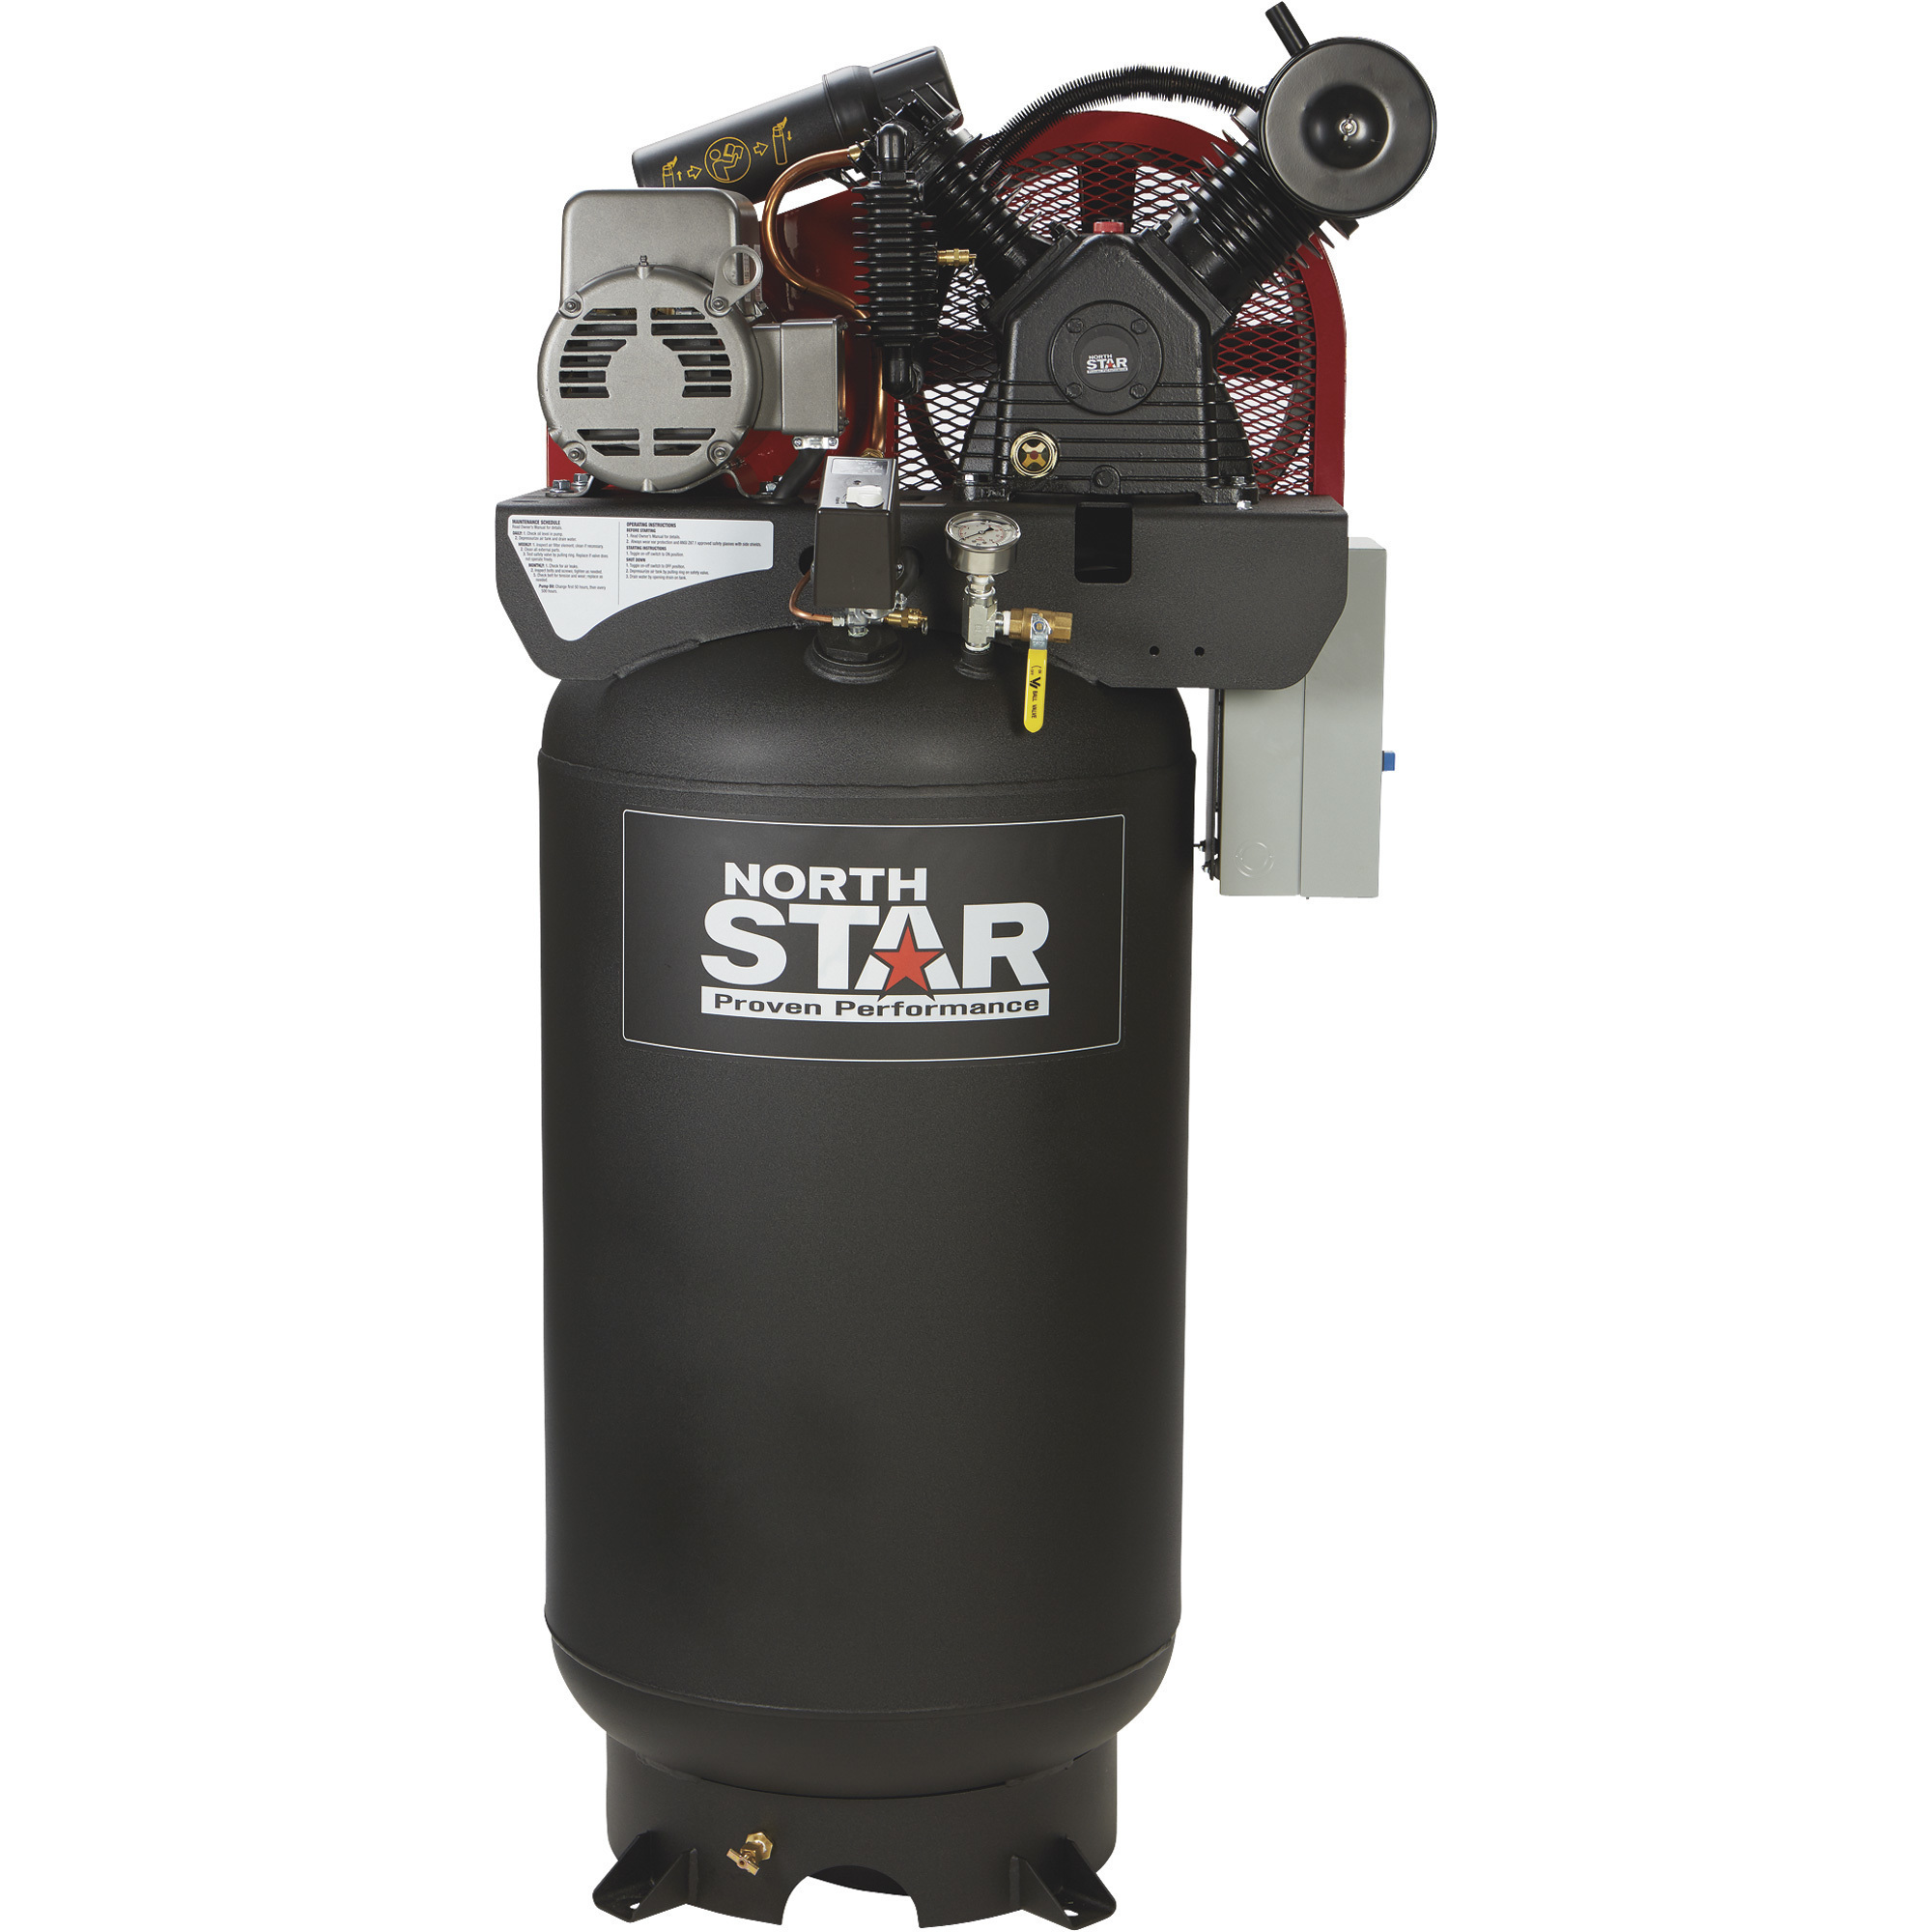  NorthStar Single-Stage Portable Electric Air Compressor - 2 HP,  20-Gallon Vertical, 5.0 CFM : NorthStar: Tools & Home Improvement